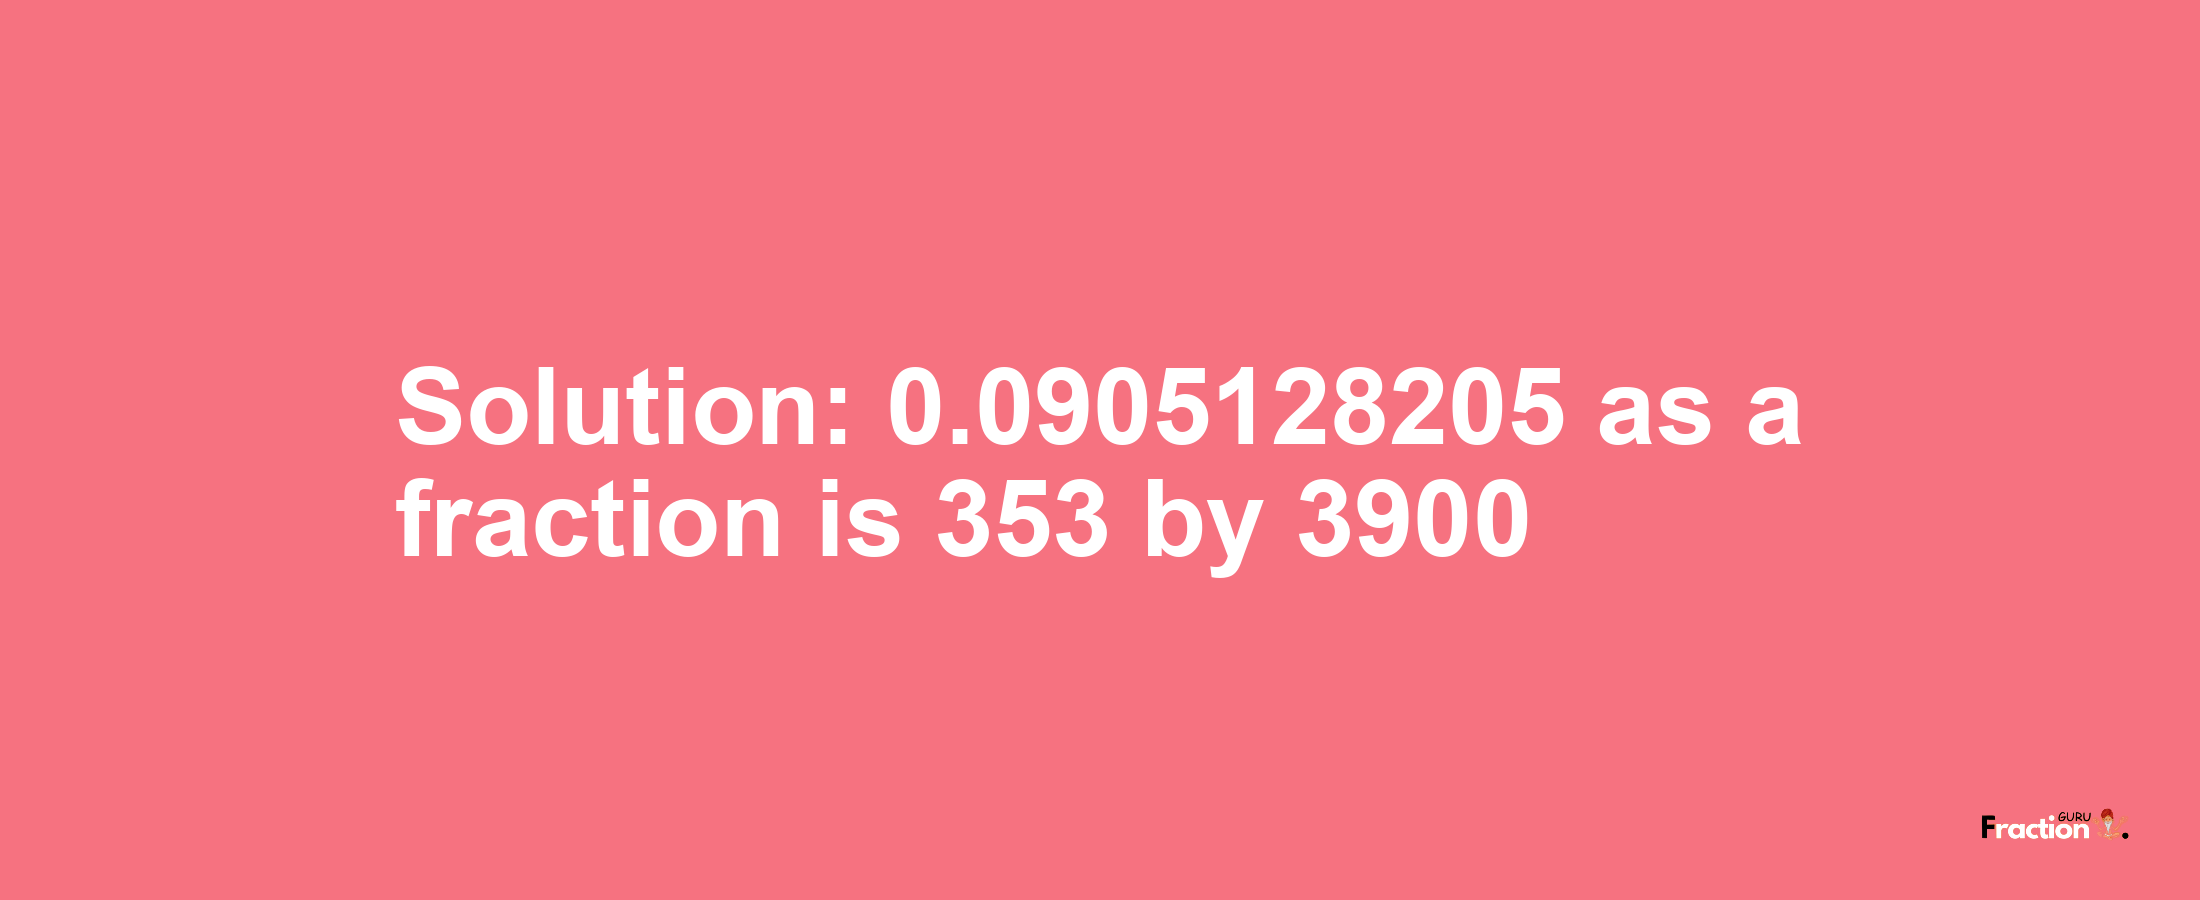 Solution:0.0905128205 as a fraction is 353/3900